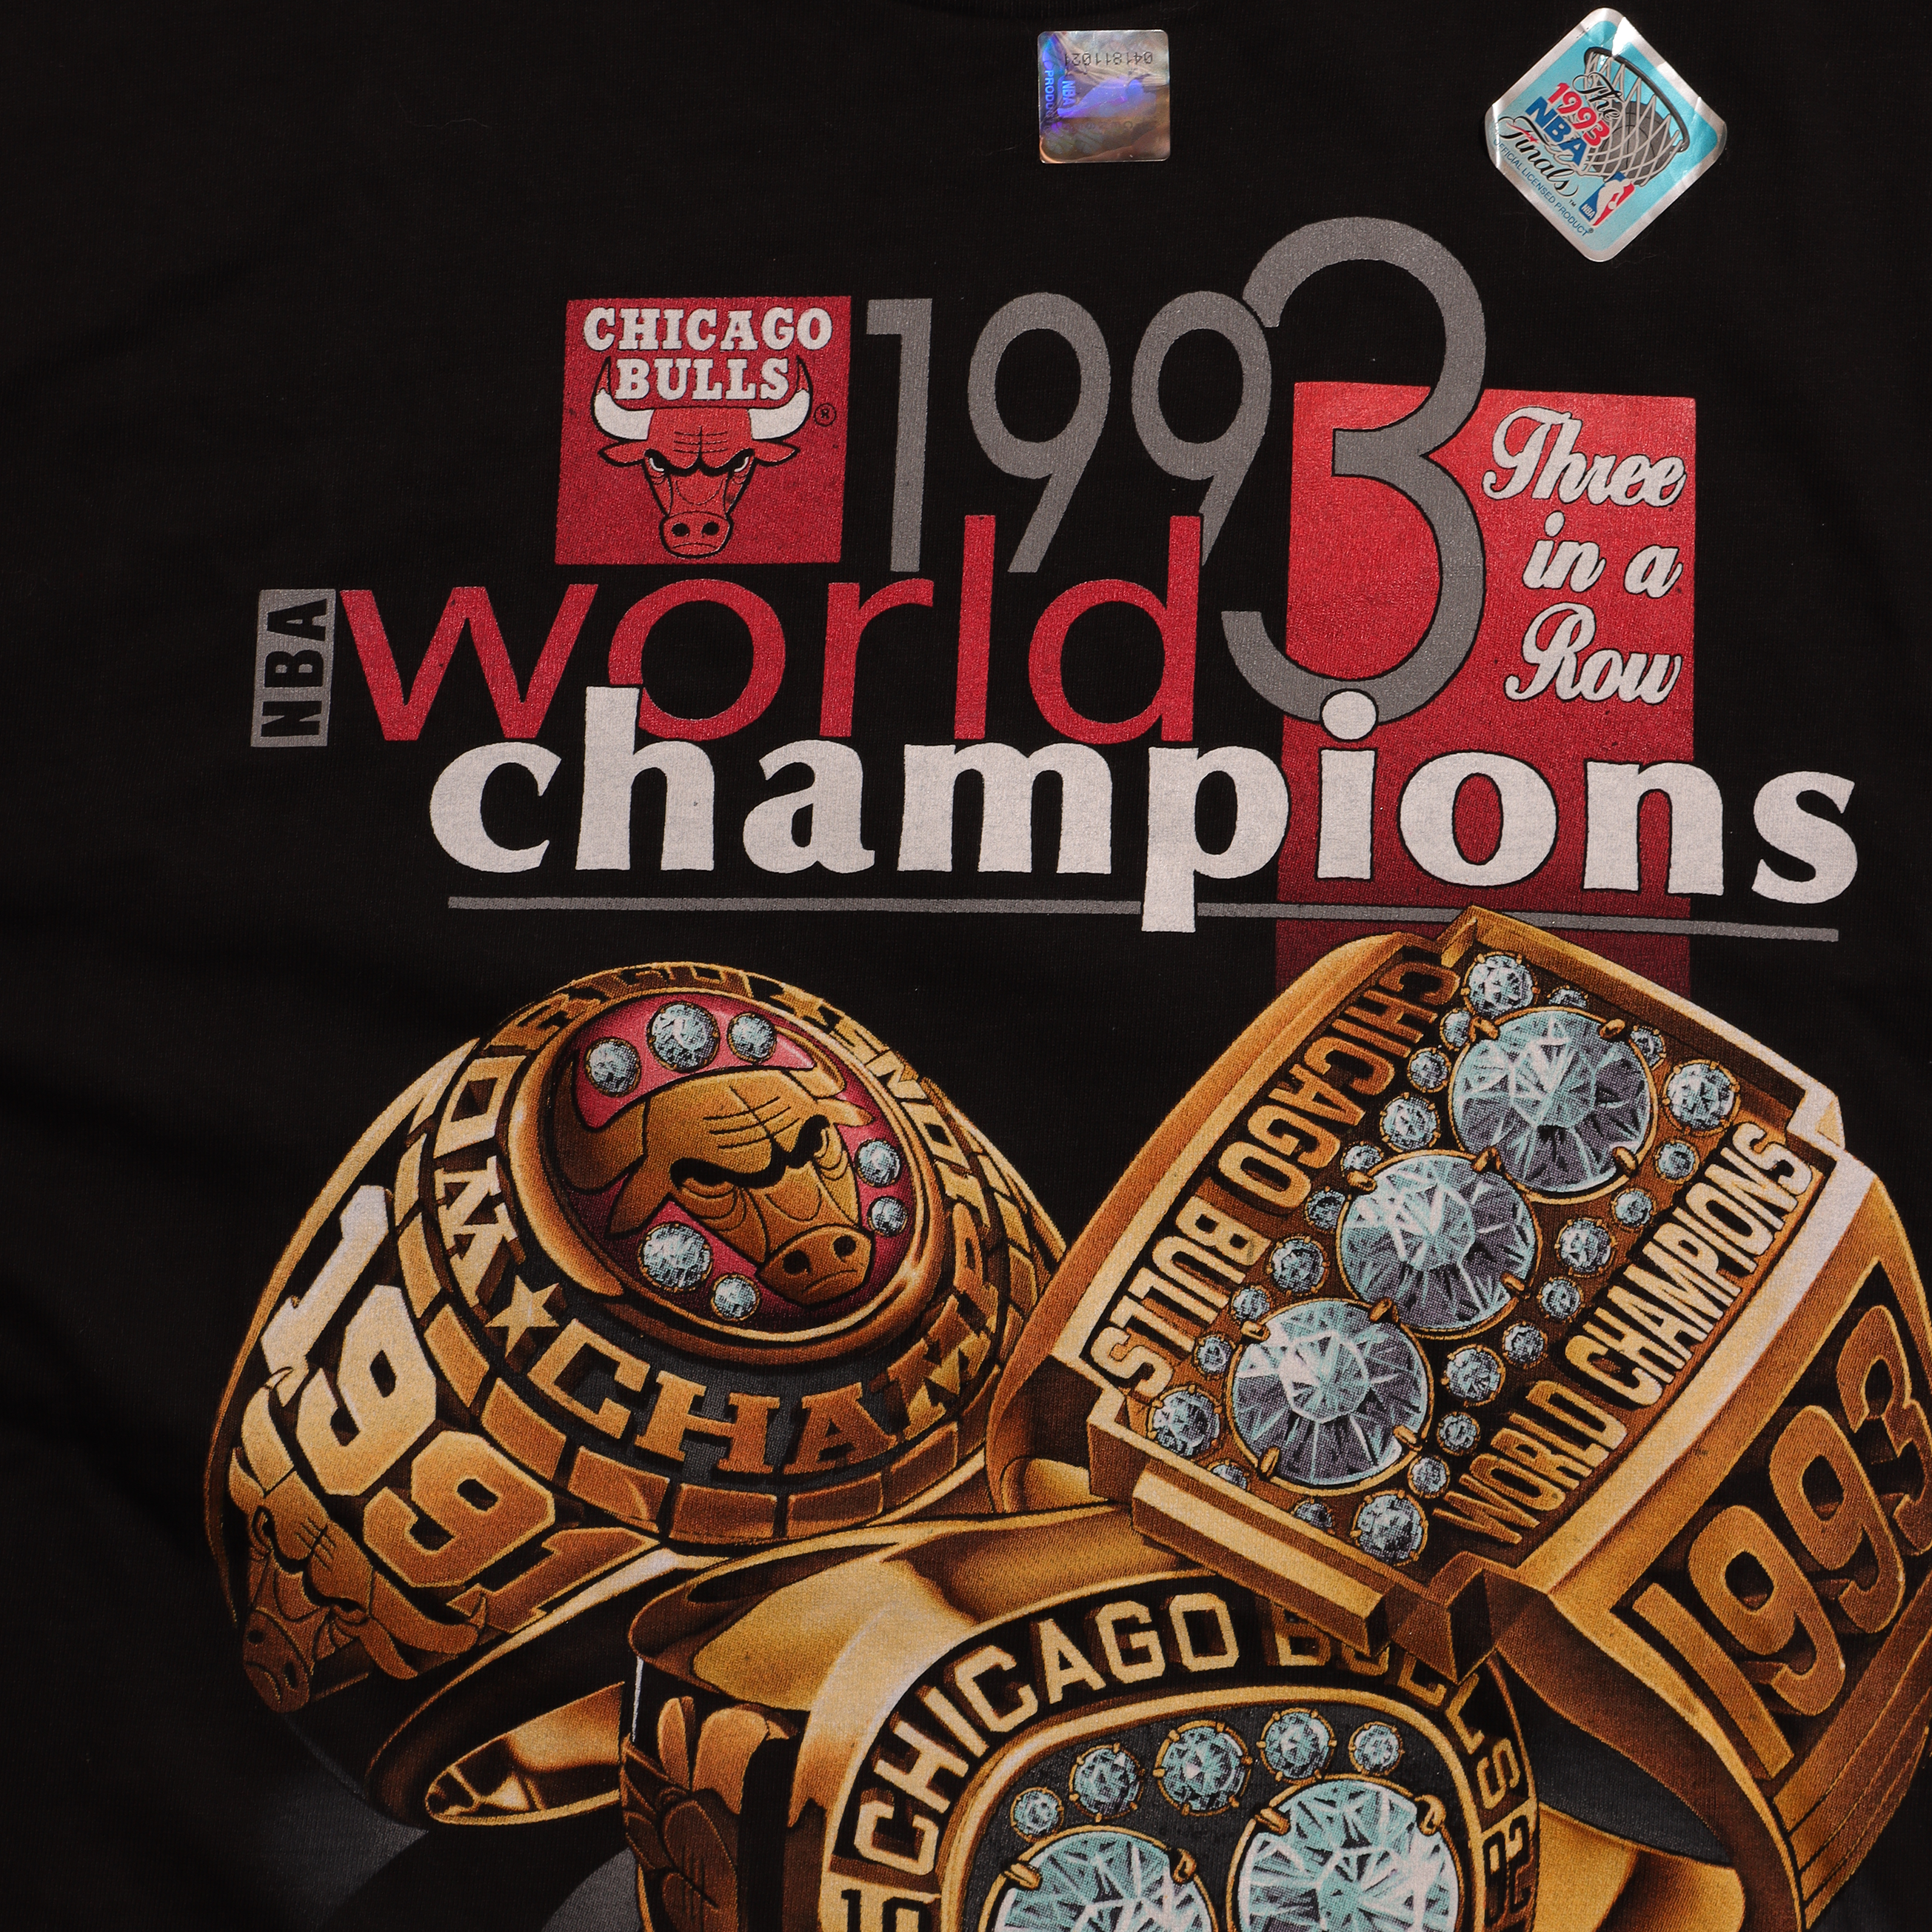 Sports / College Vintage NBA Chicago Bulls World Champs 1993 Tee Shirt Size XL Made in USA